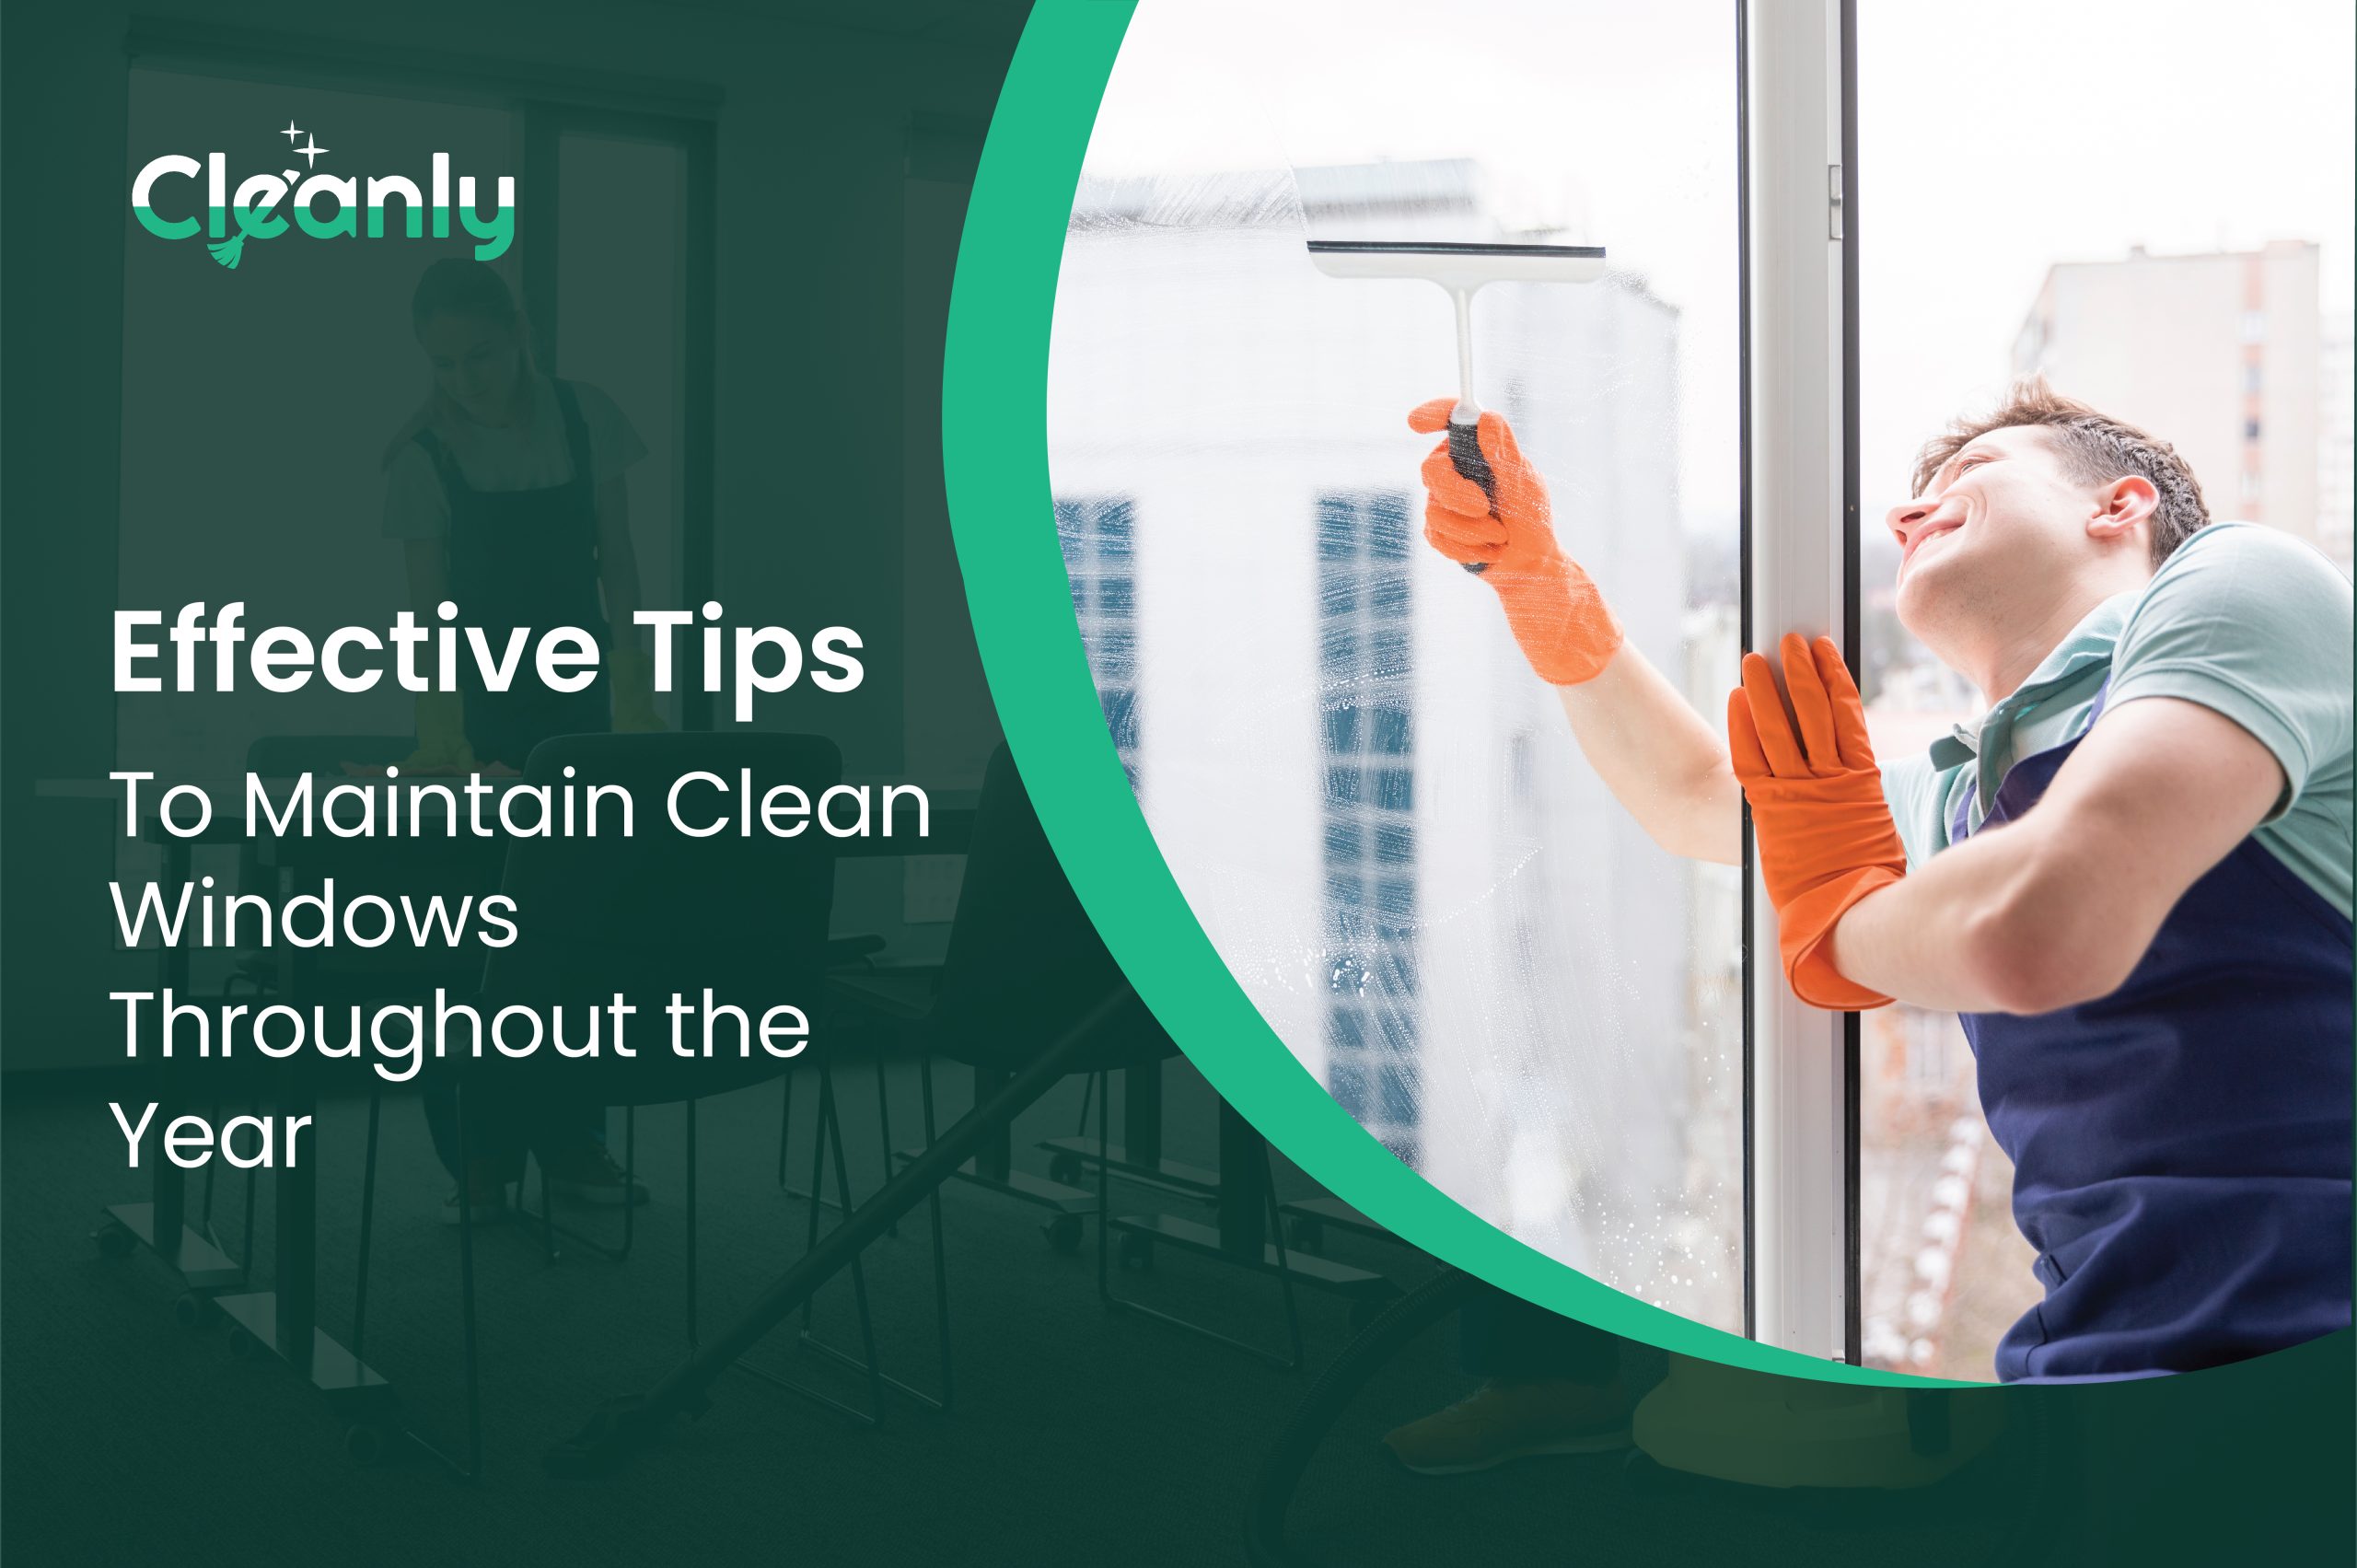 Effective Tips to Maintain Clean Windows Throughout the Year